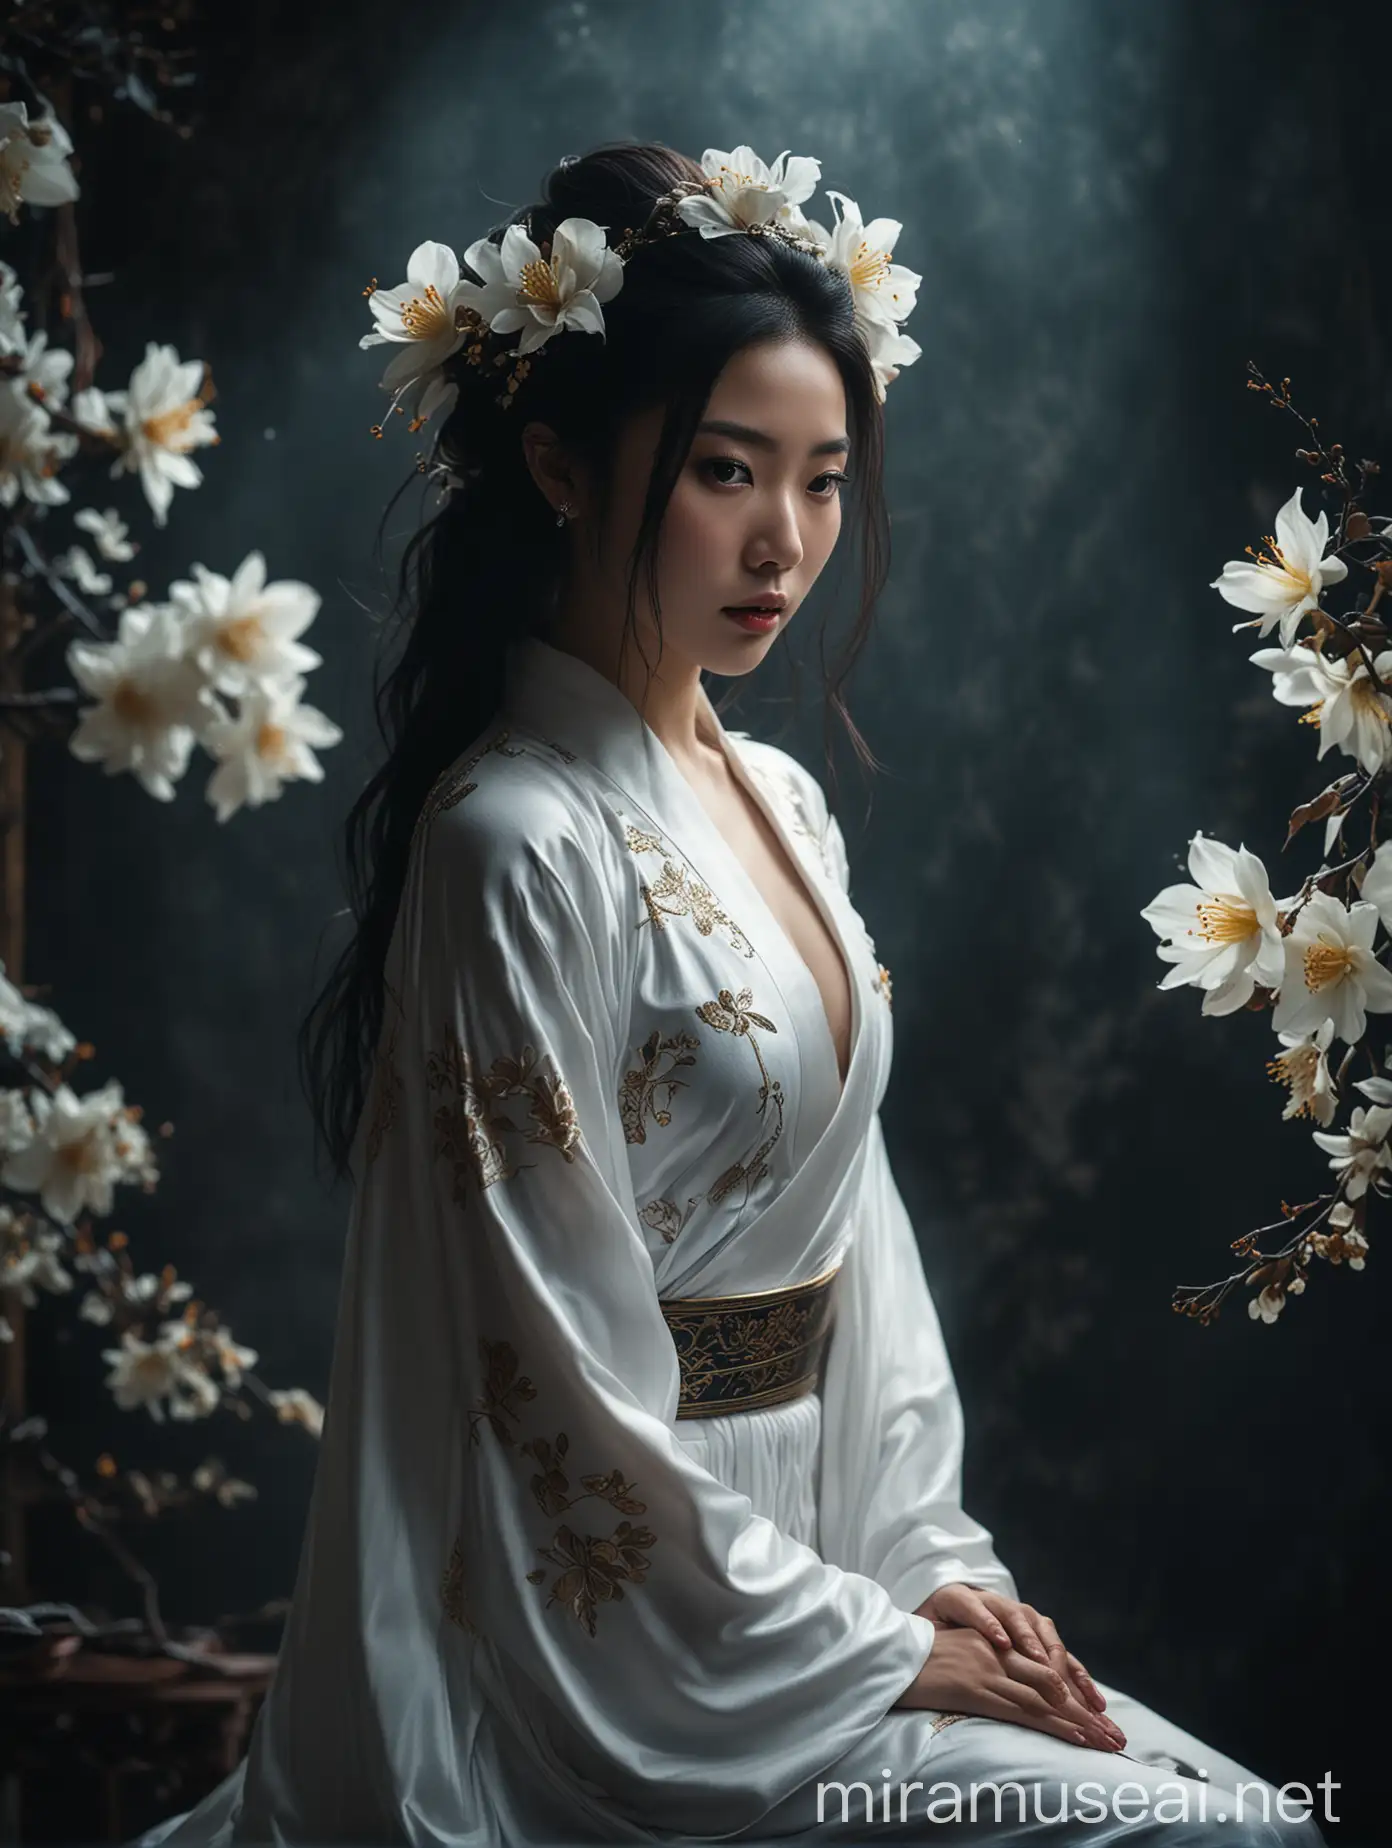 Princess, Chinese, regal, sexy, flowing white robe, dark, epic, cinematic, flowers, portrait